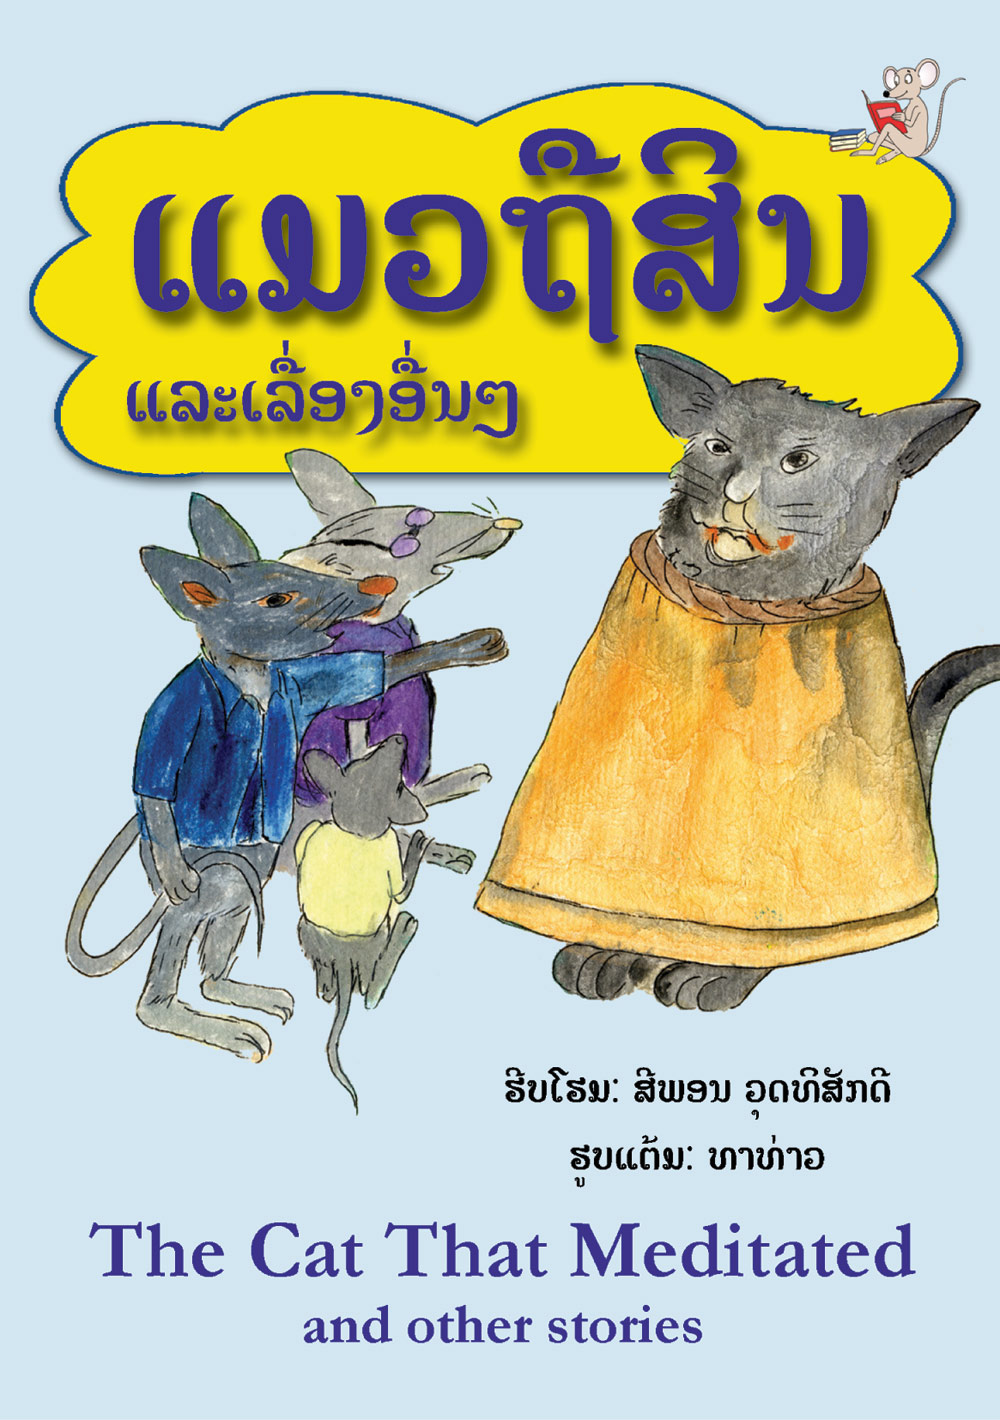 The Cat That Meditated large book cover, published in Lao language